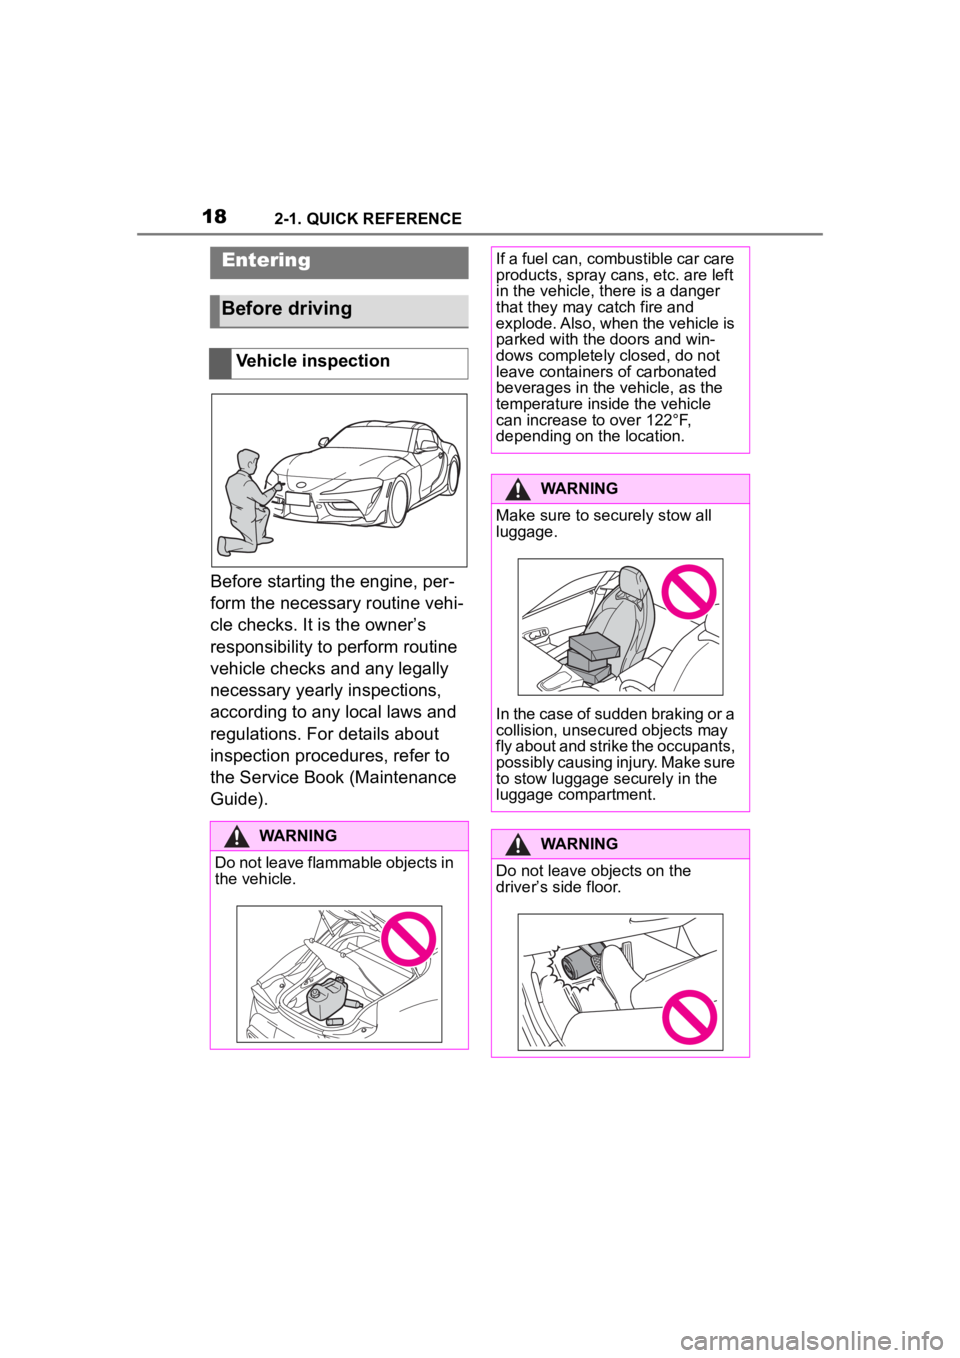 TOYOTA SUPRA 2023  Owners Manual 182-1. QUICK REFERENCE
2-1.QUICK REFERENCE
Before starting the engine, per-
form the necessary routine vehi-
cle checks. It is the owner’s 
responsibility to perform routine 
vehicle checks and any 